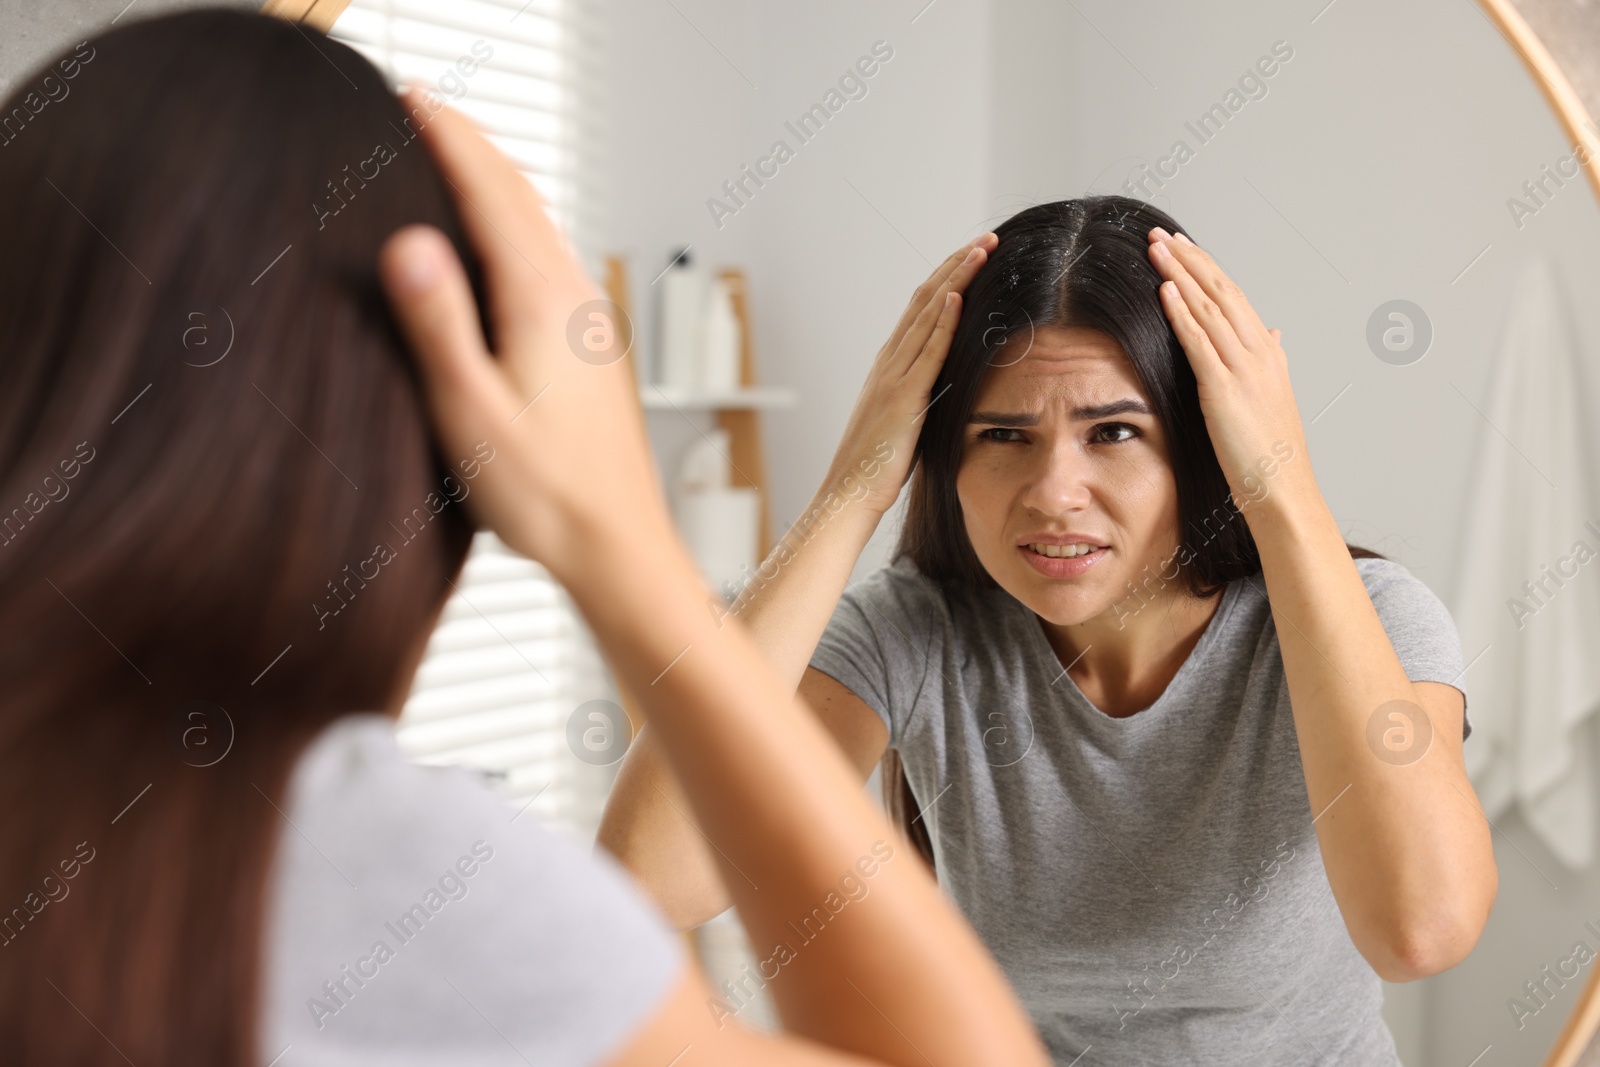 Photo of Emotional woman examining her hair and scalp near mirror in bathroom. Dandruff problem